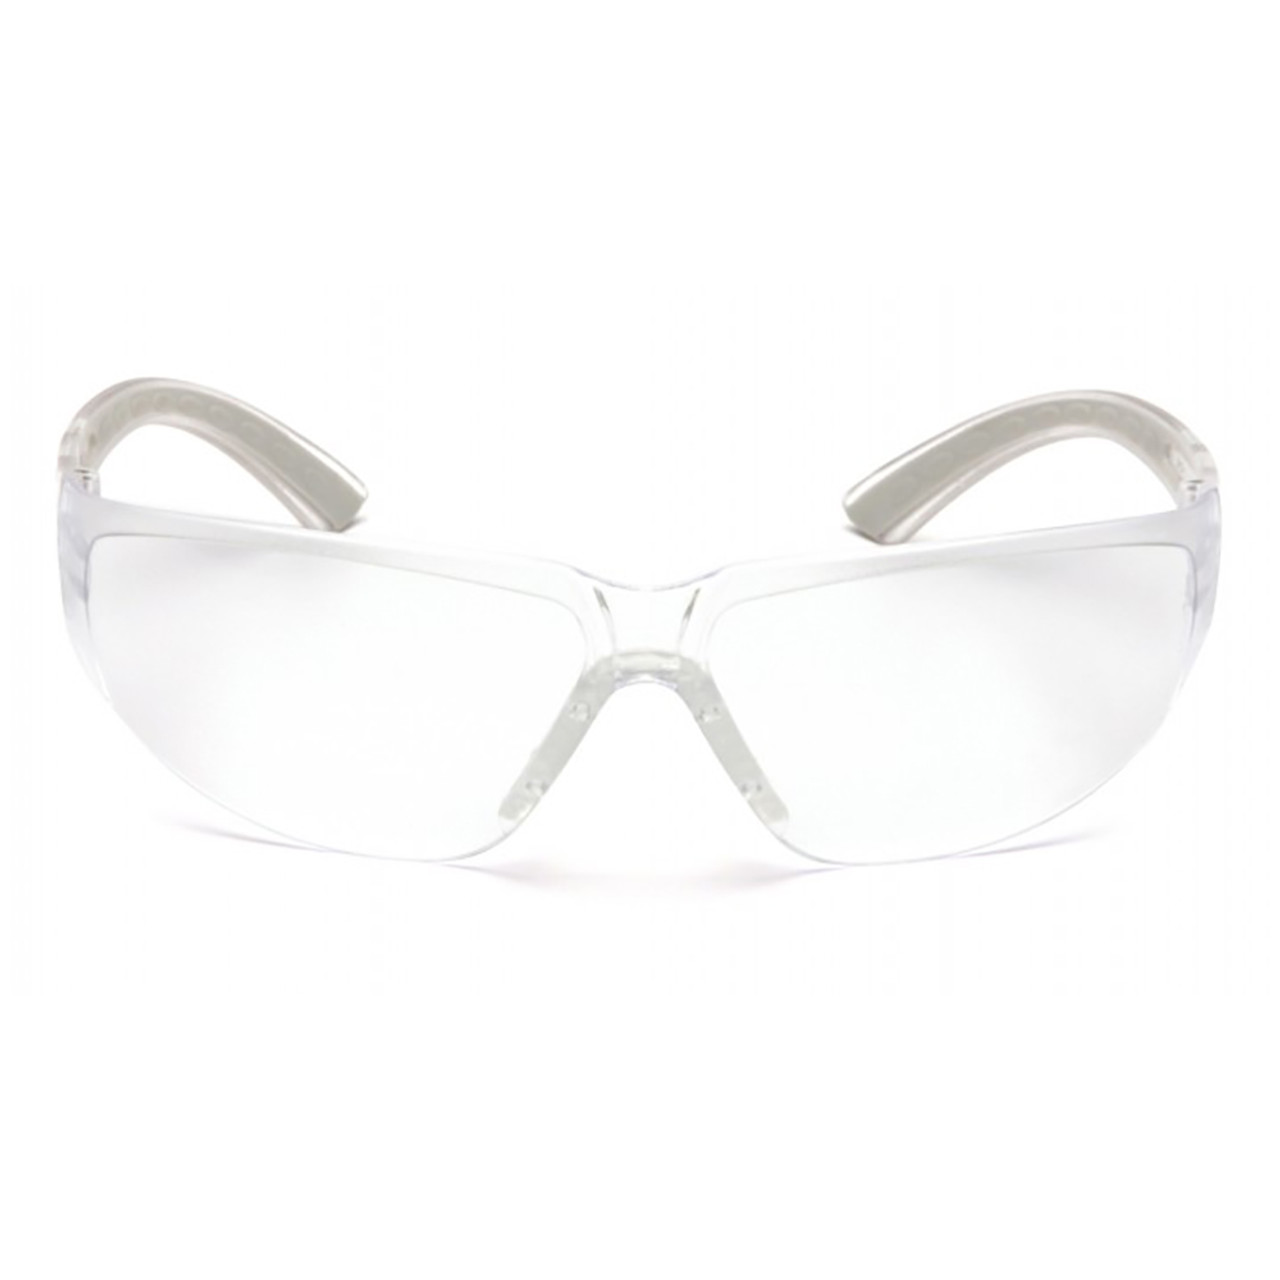 Pyramex, Cortez Series, Safety Glasses with Clear Lens